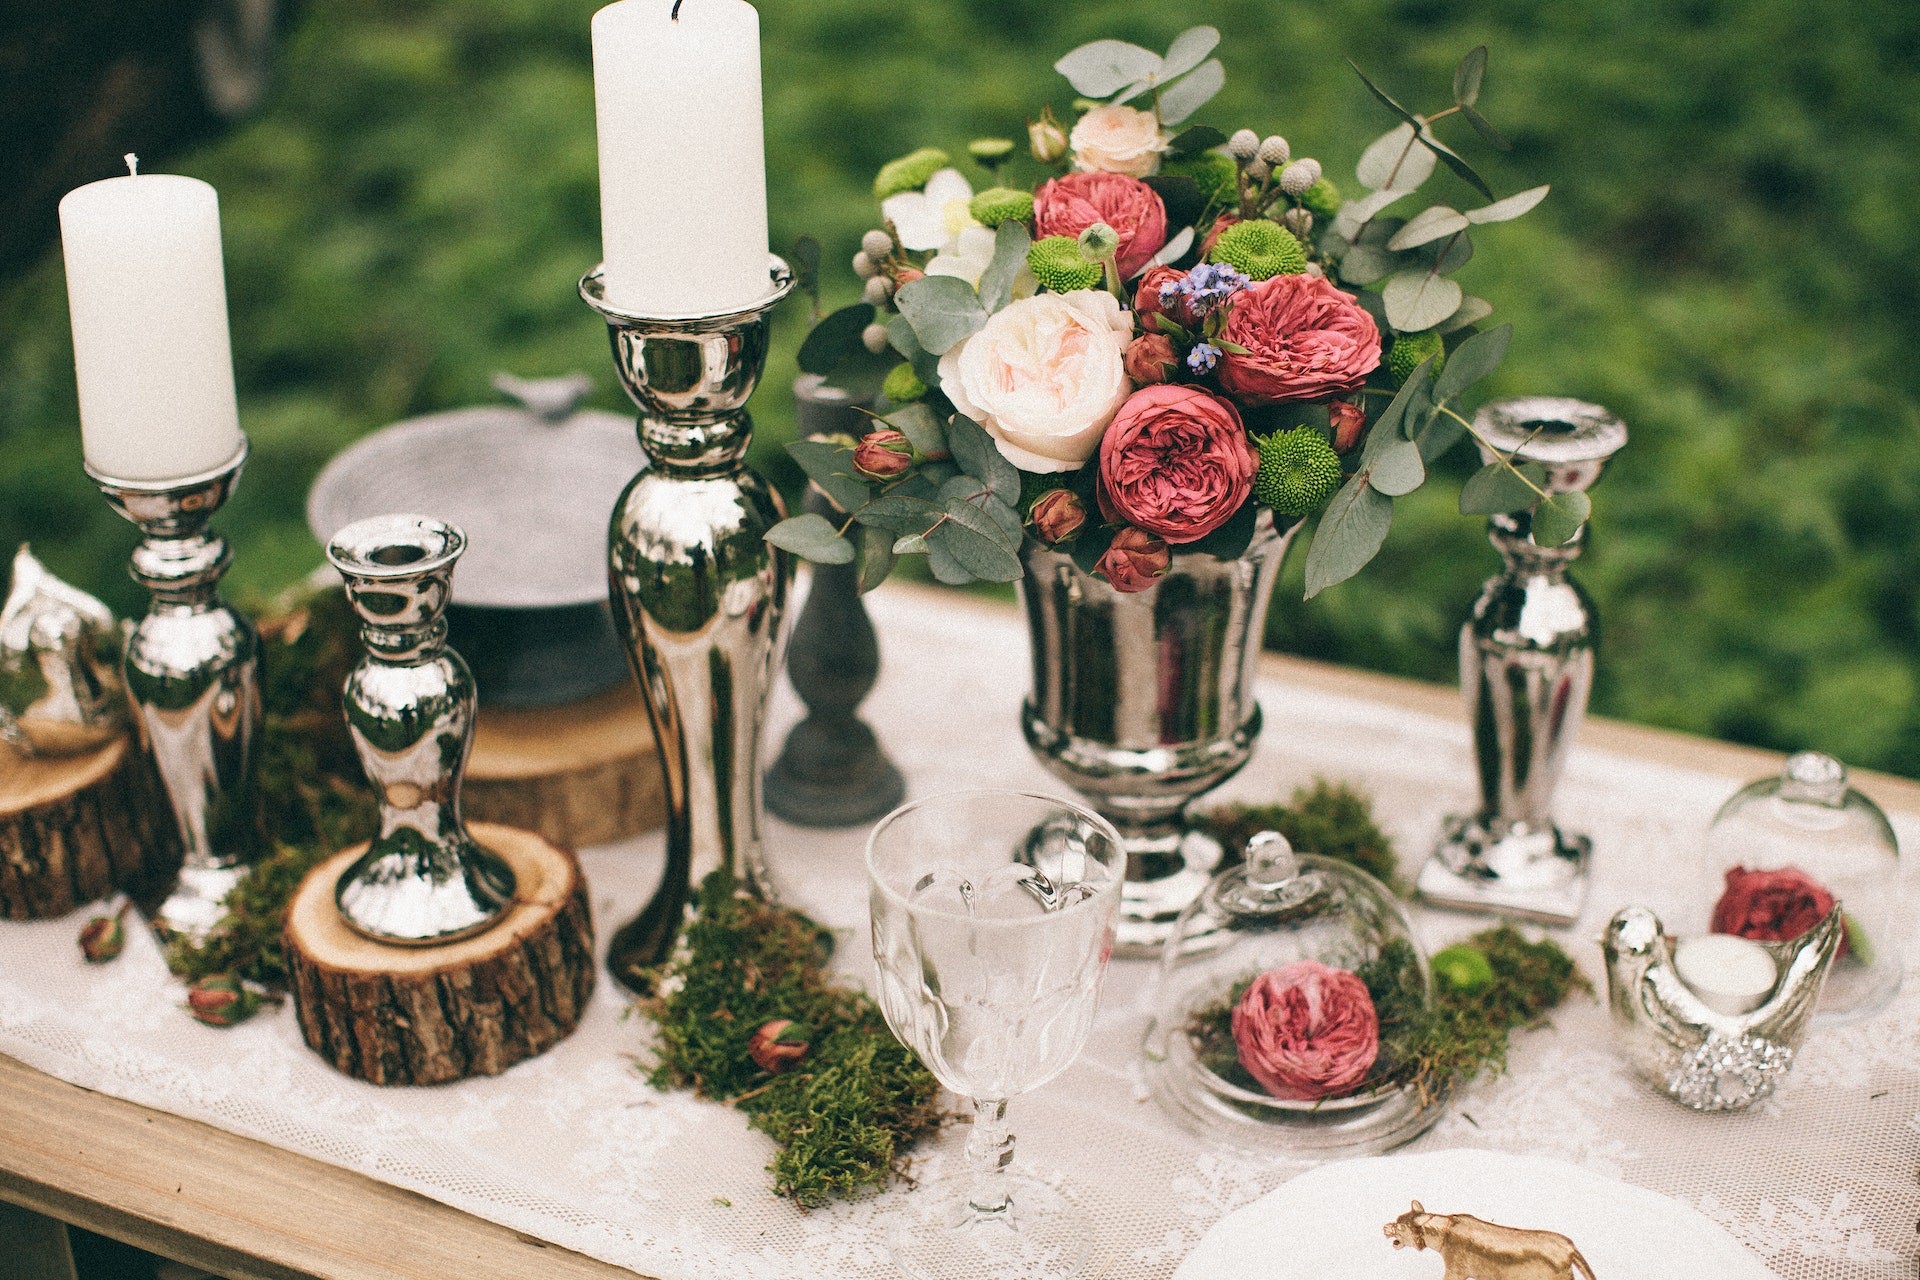 Great Details to Add to Your Wedding Tables